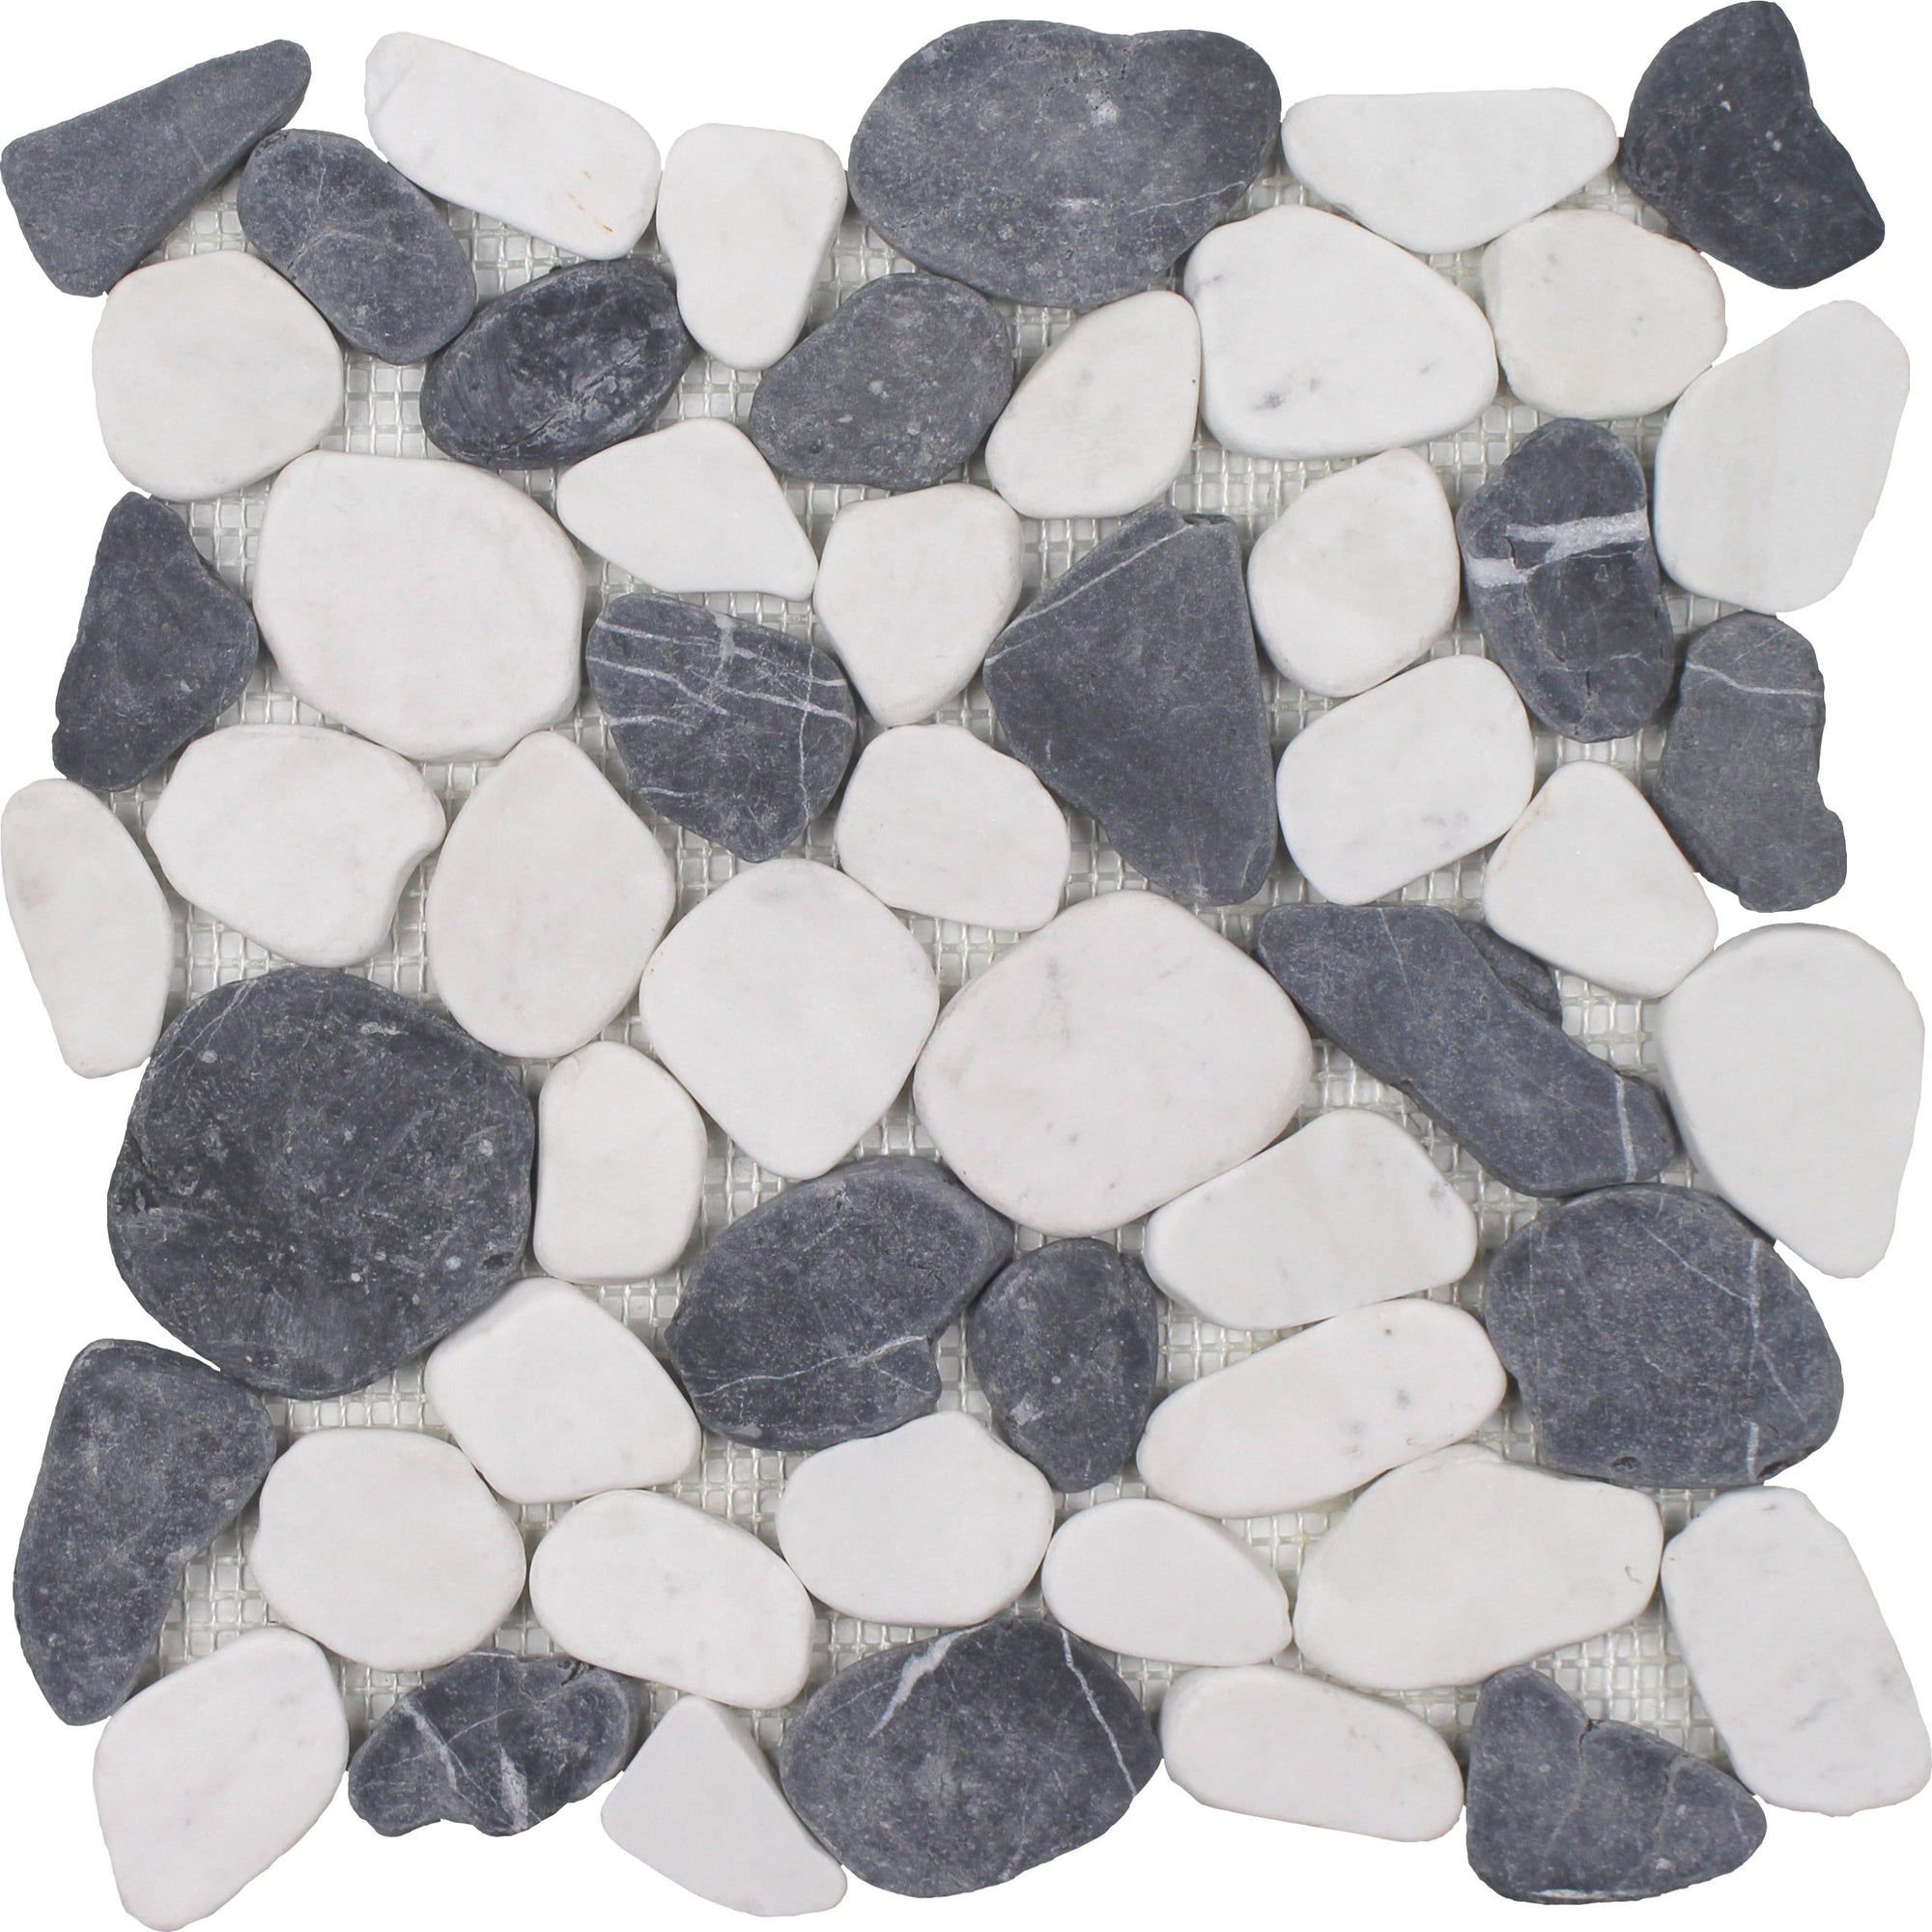 Tesoro - Beach Stones Collection - Sliced Pebble Mosaic - White and Blue